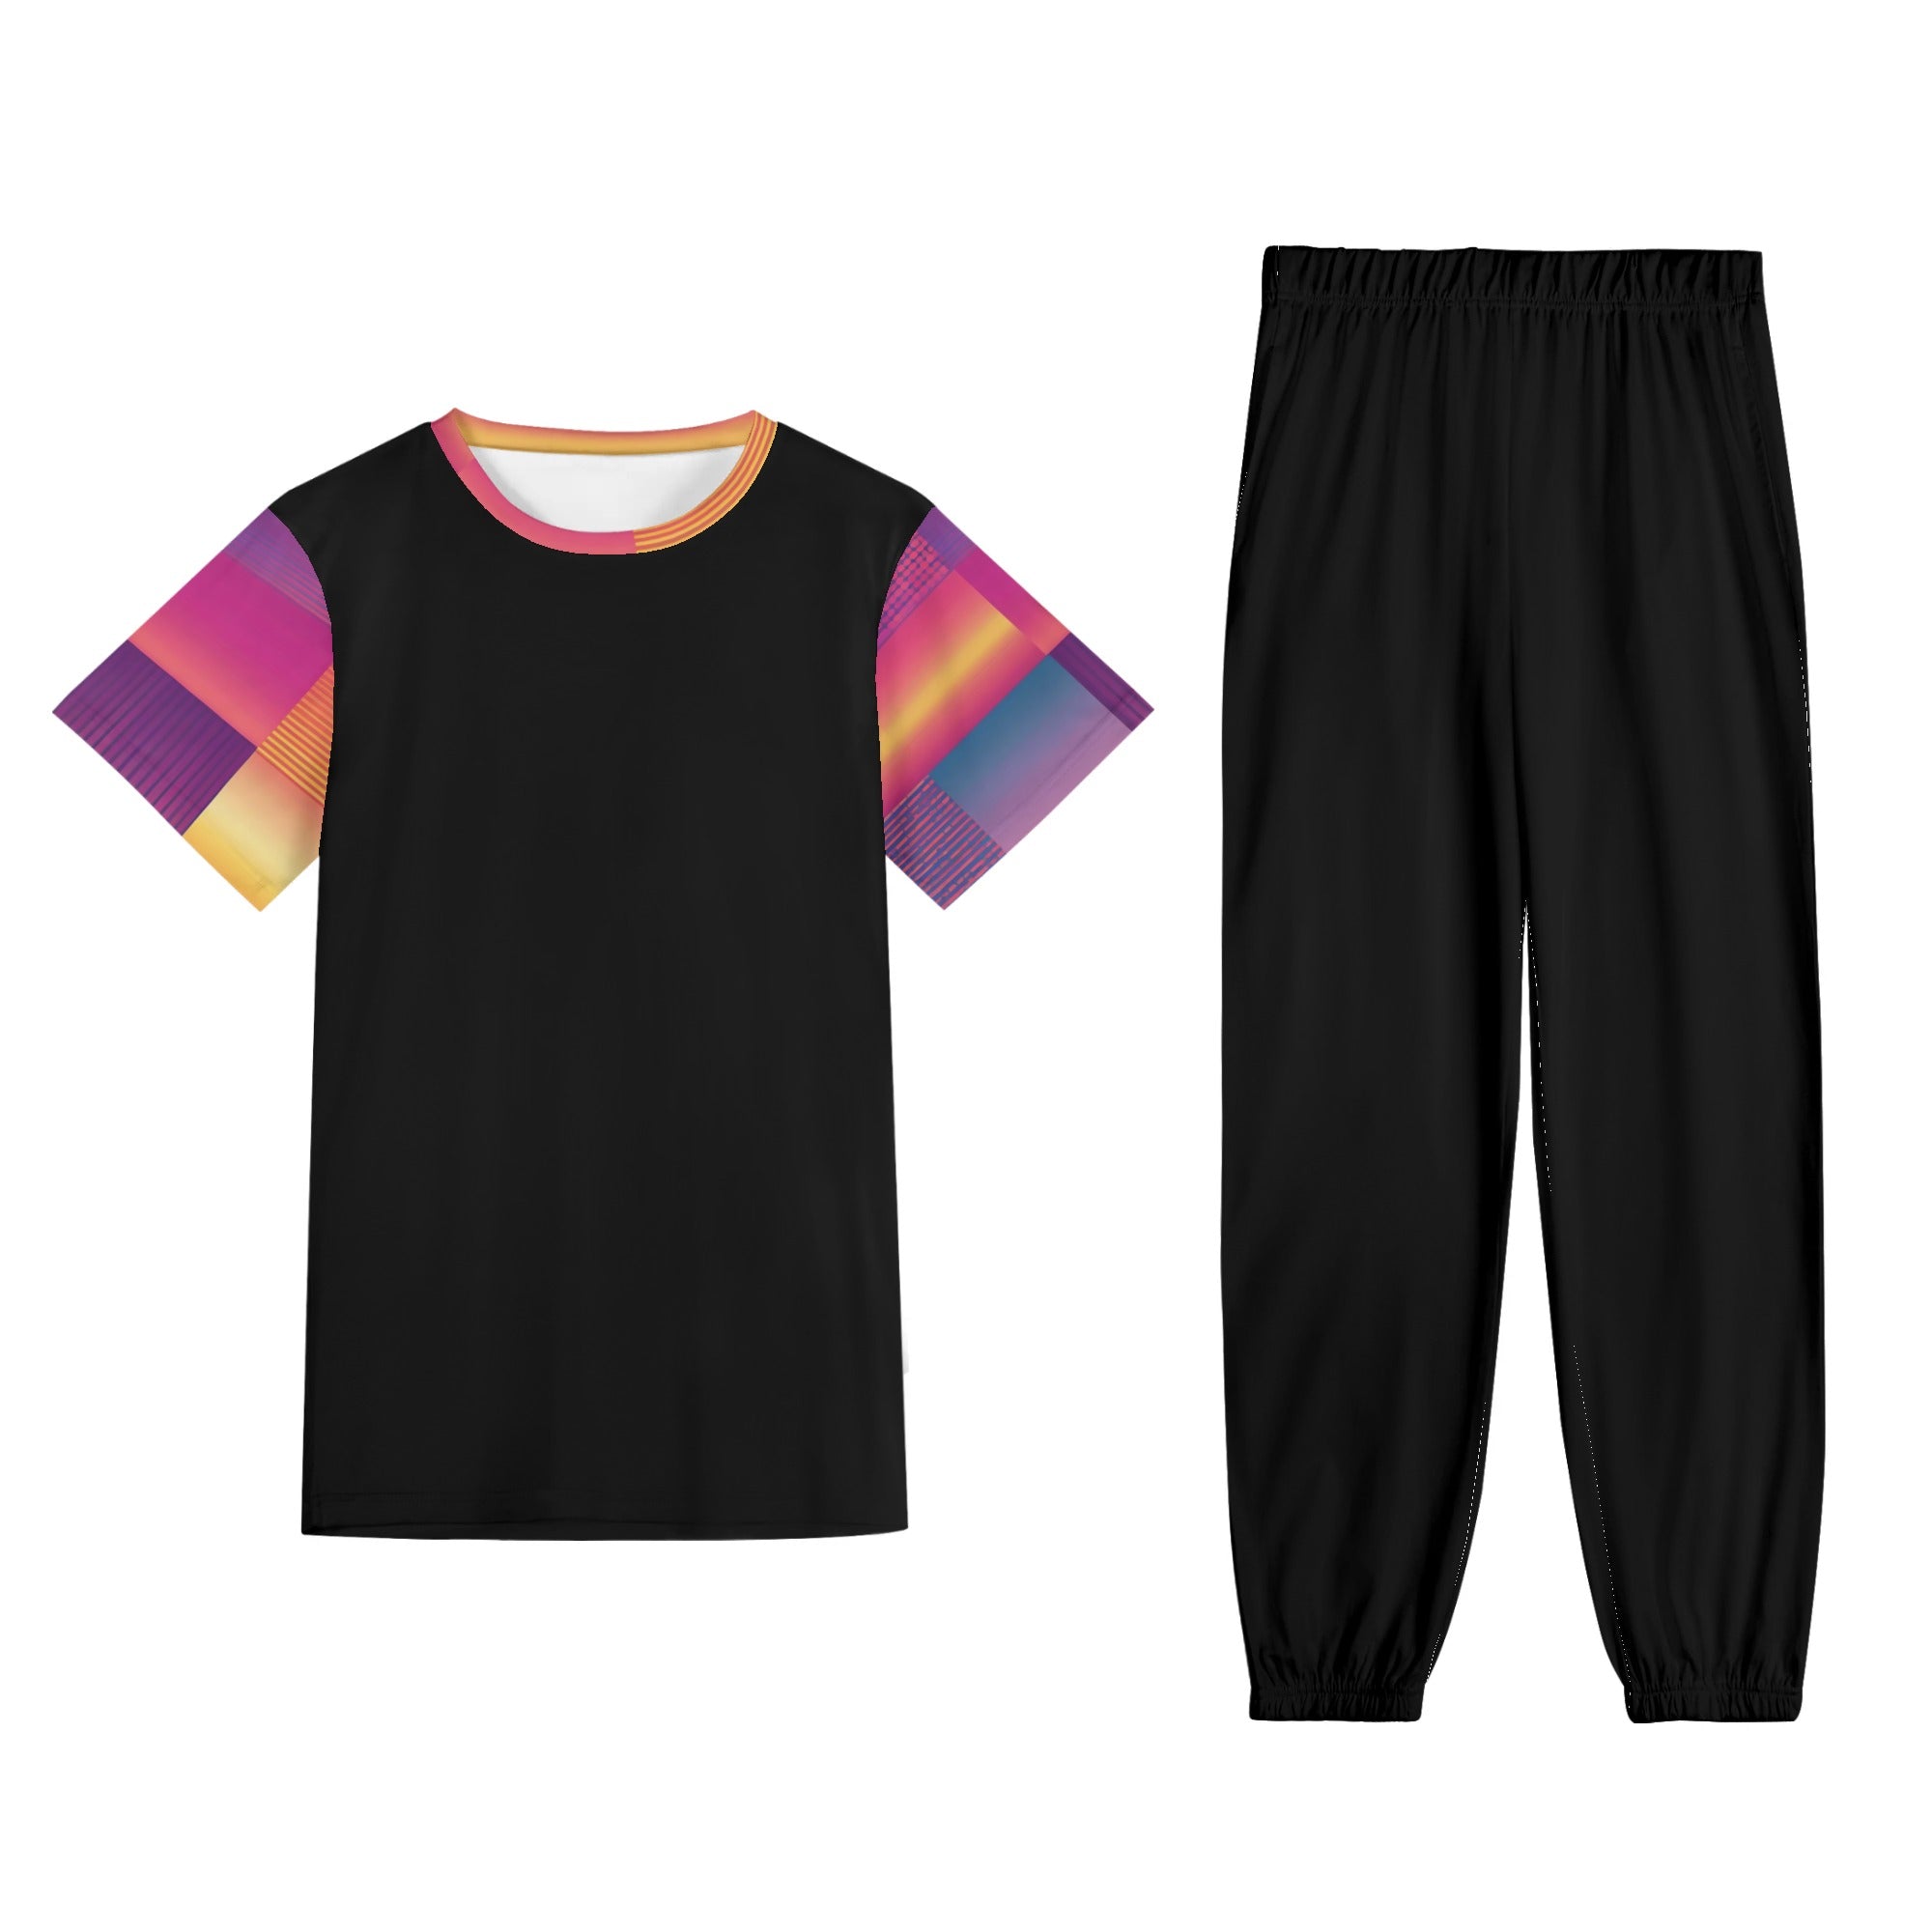 2 - Gradient Style Womens Short Sleeve Sports Outfit Set - at TFC&H Co.